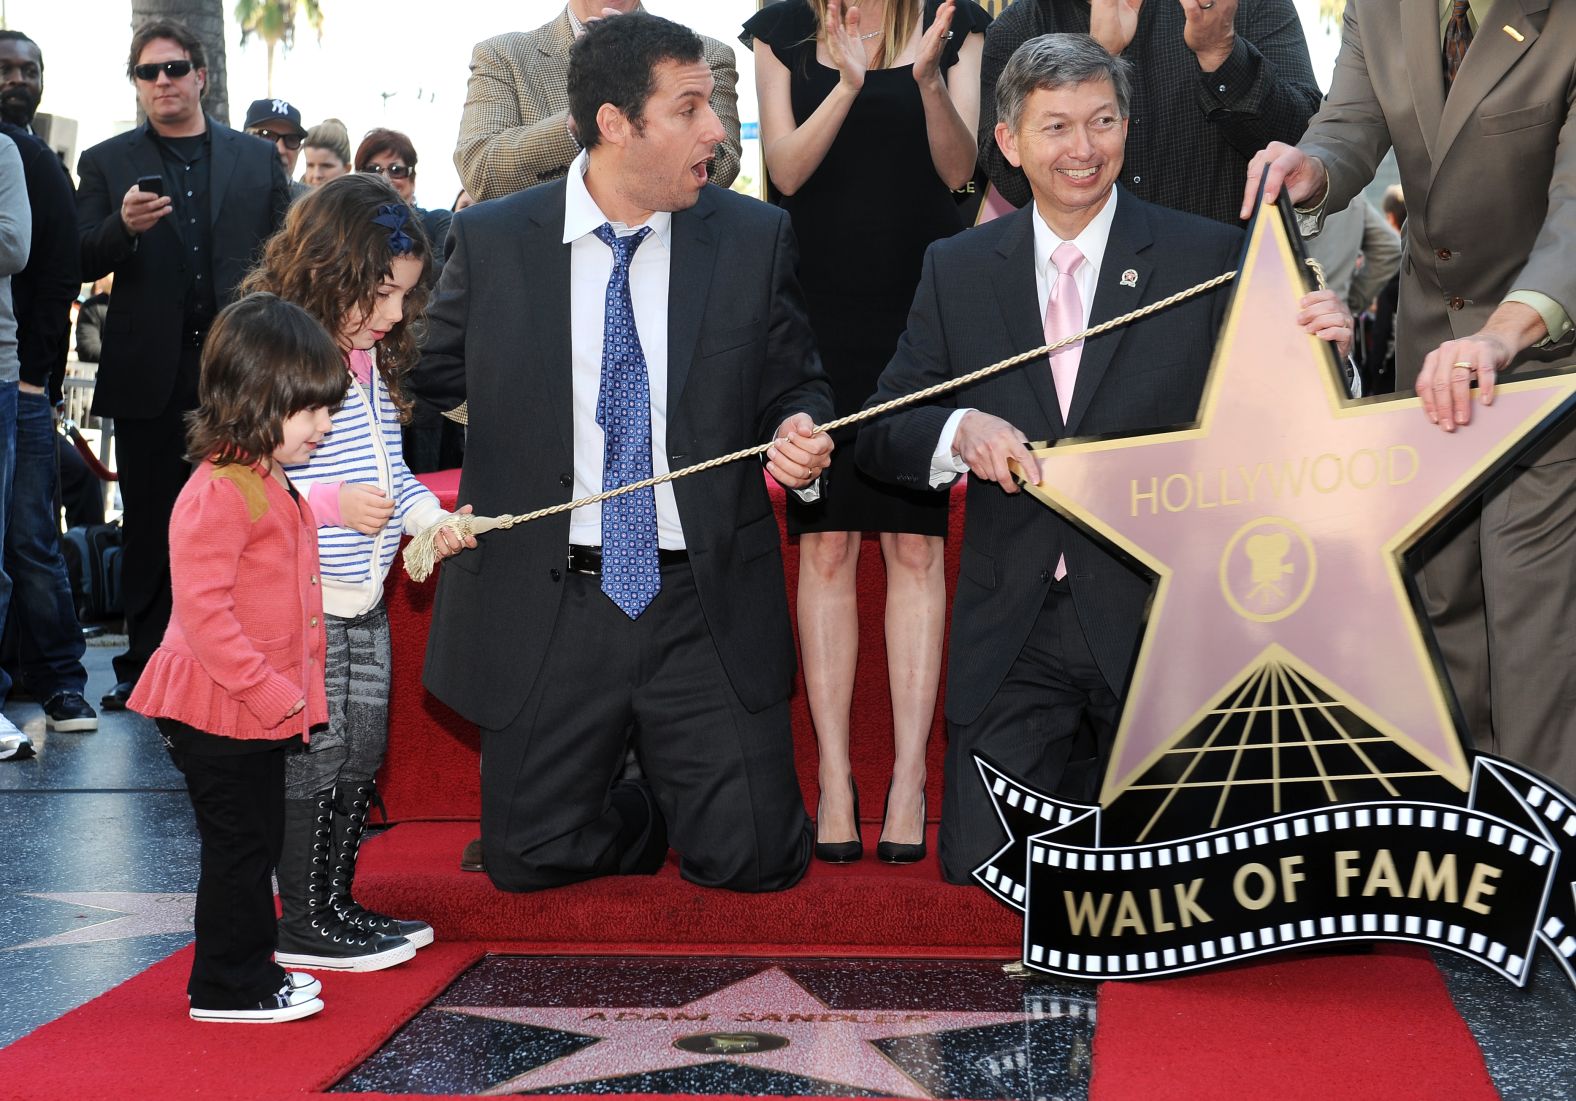 Sandler is joined by his daughters, Sunny and Sadie, as he is honored with a star on the Hollywood Walk of Fame in 2011.